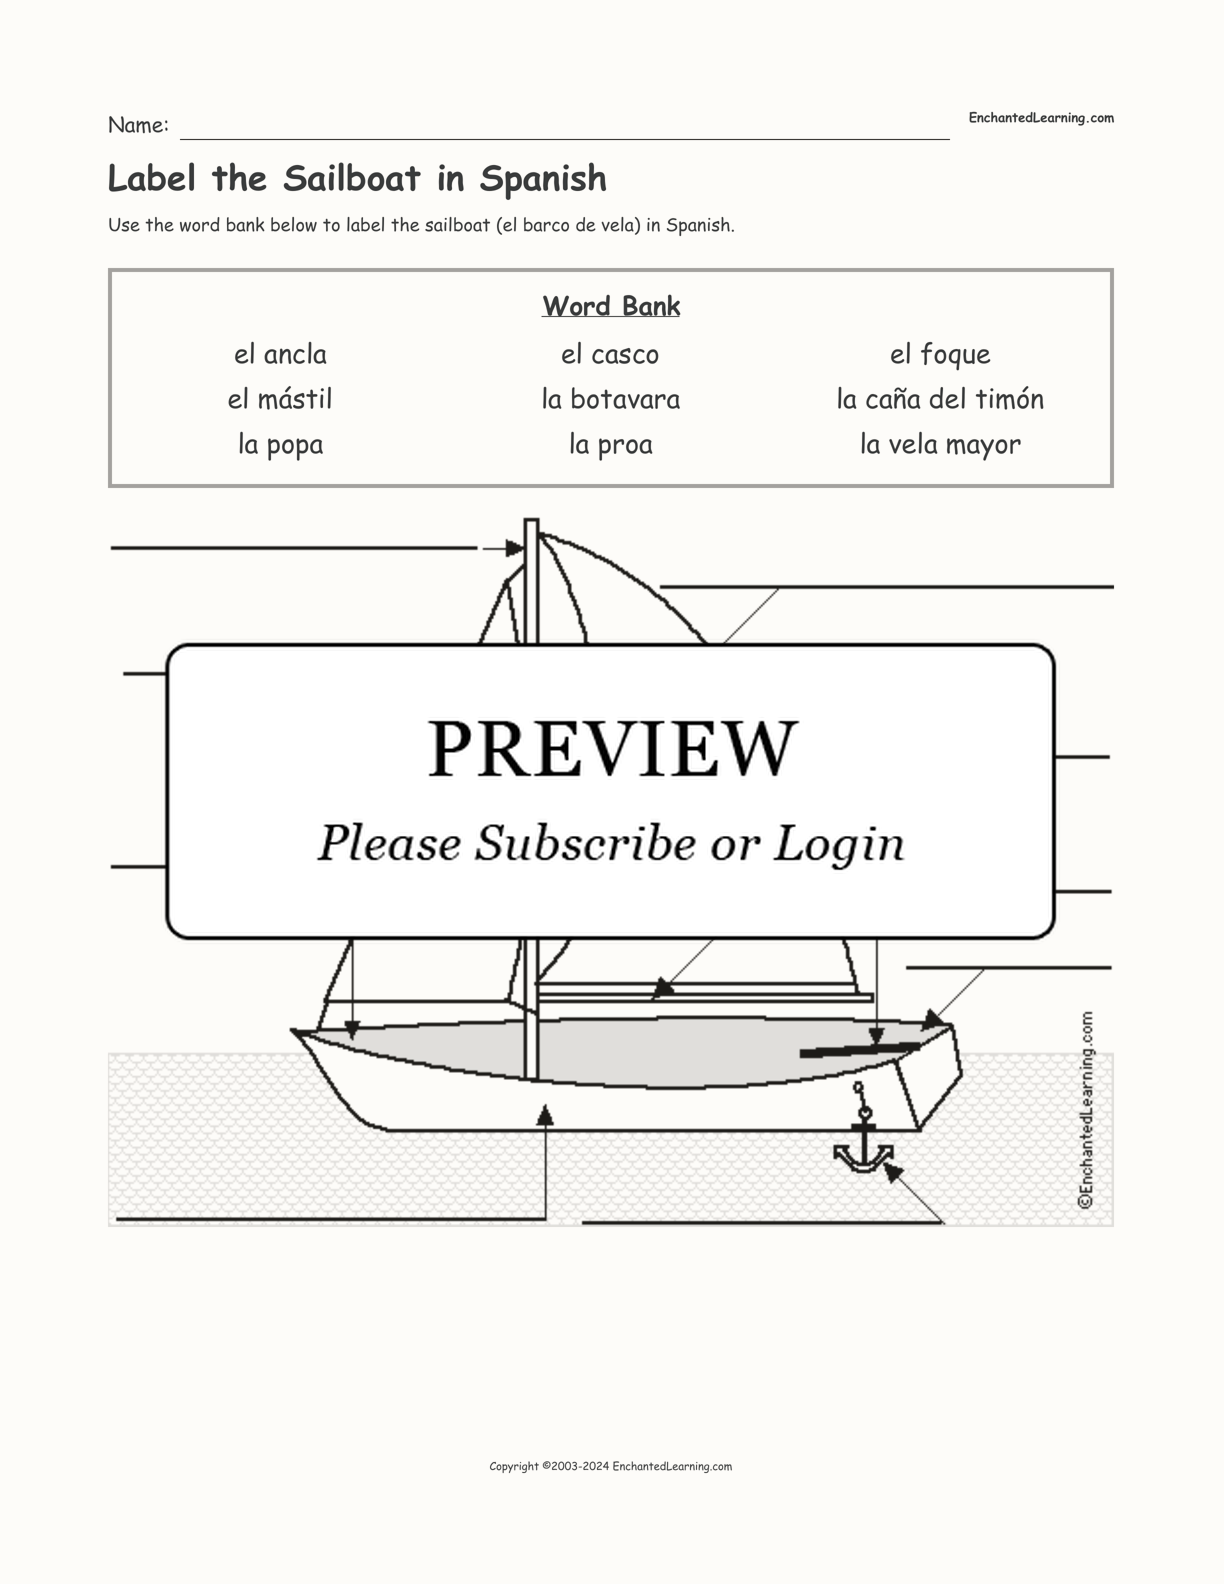 Label the Sailboat in Spanish interactive worksheet page 1